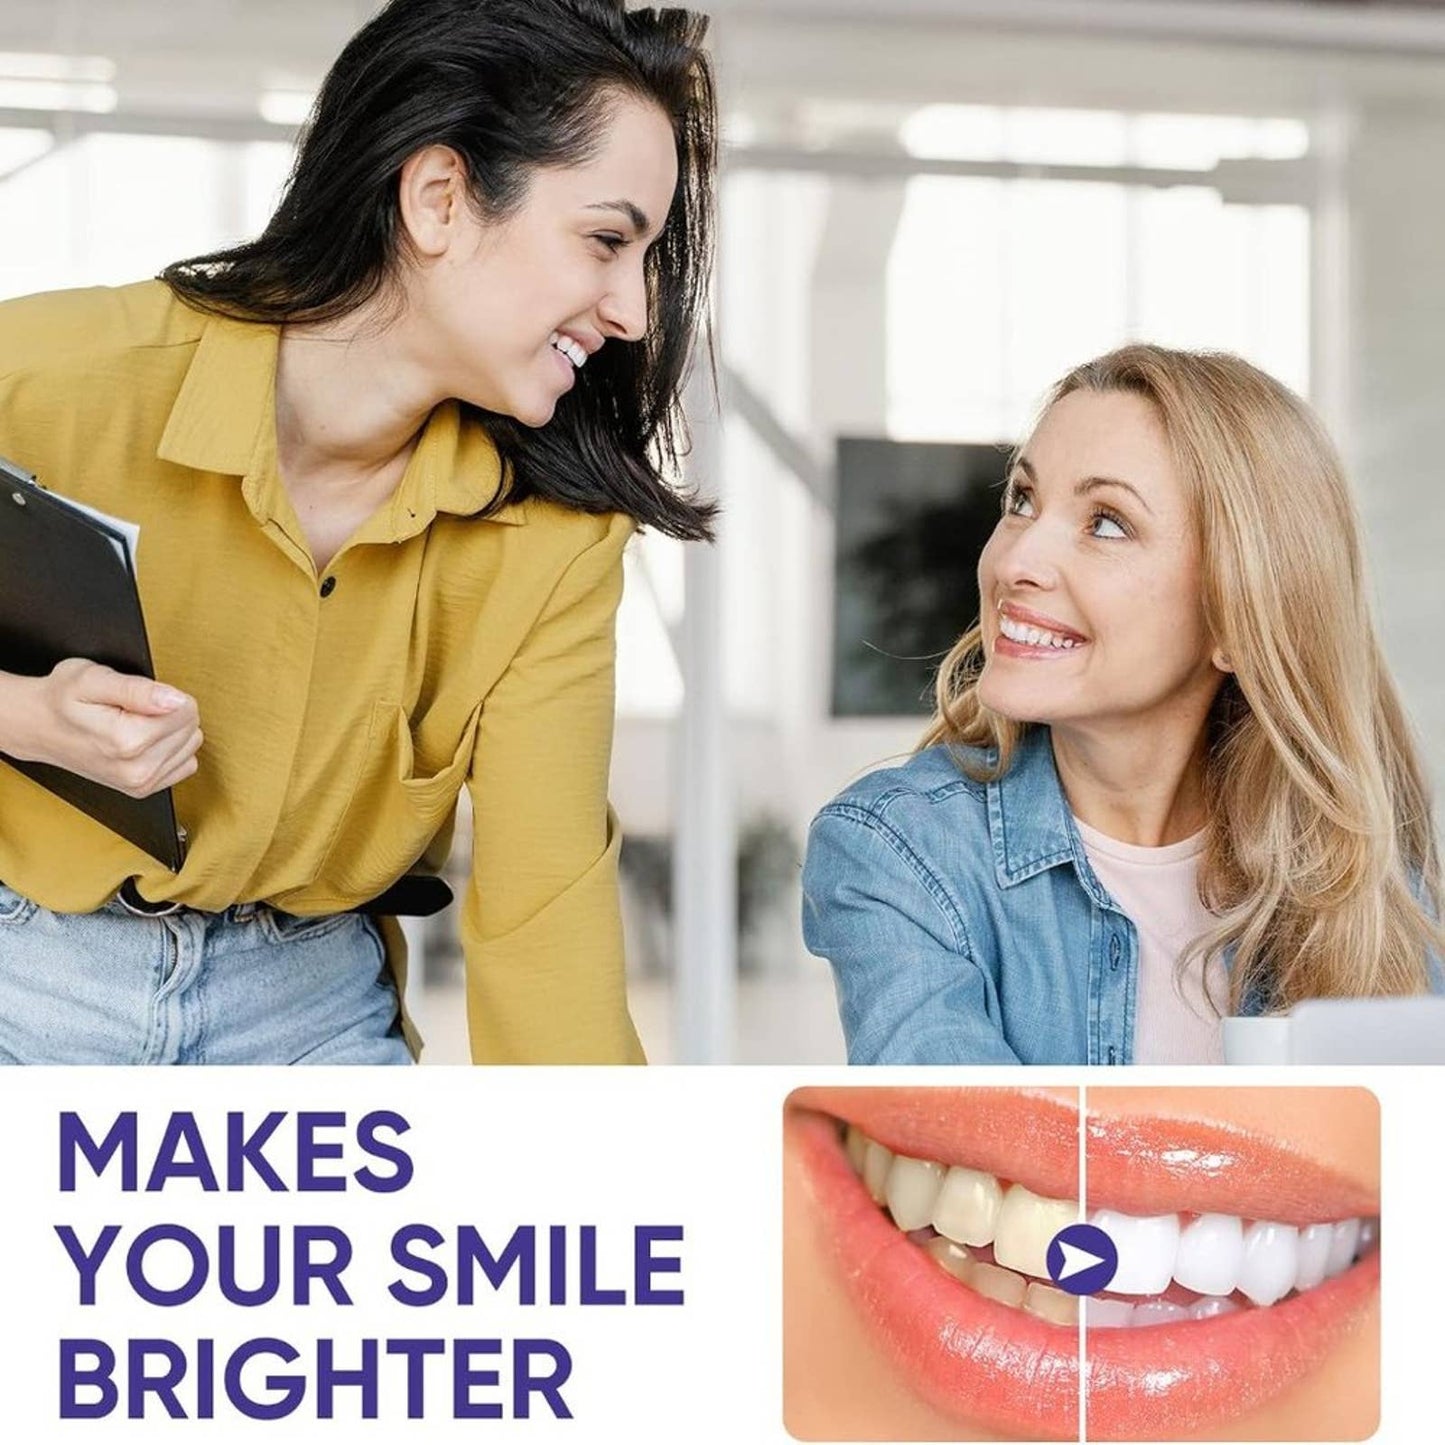 Purple Toothpaste Whitening, Purple Teeth Whitening Toothpaste for Adults